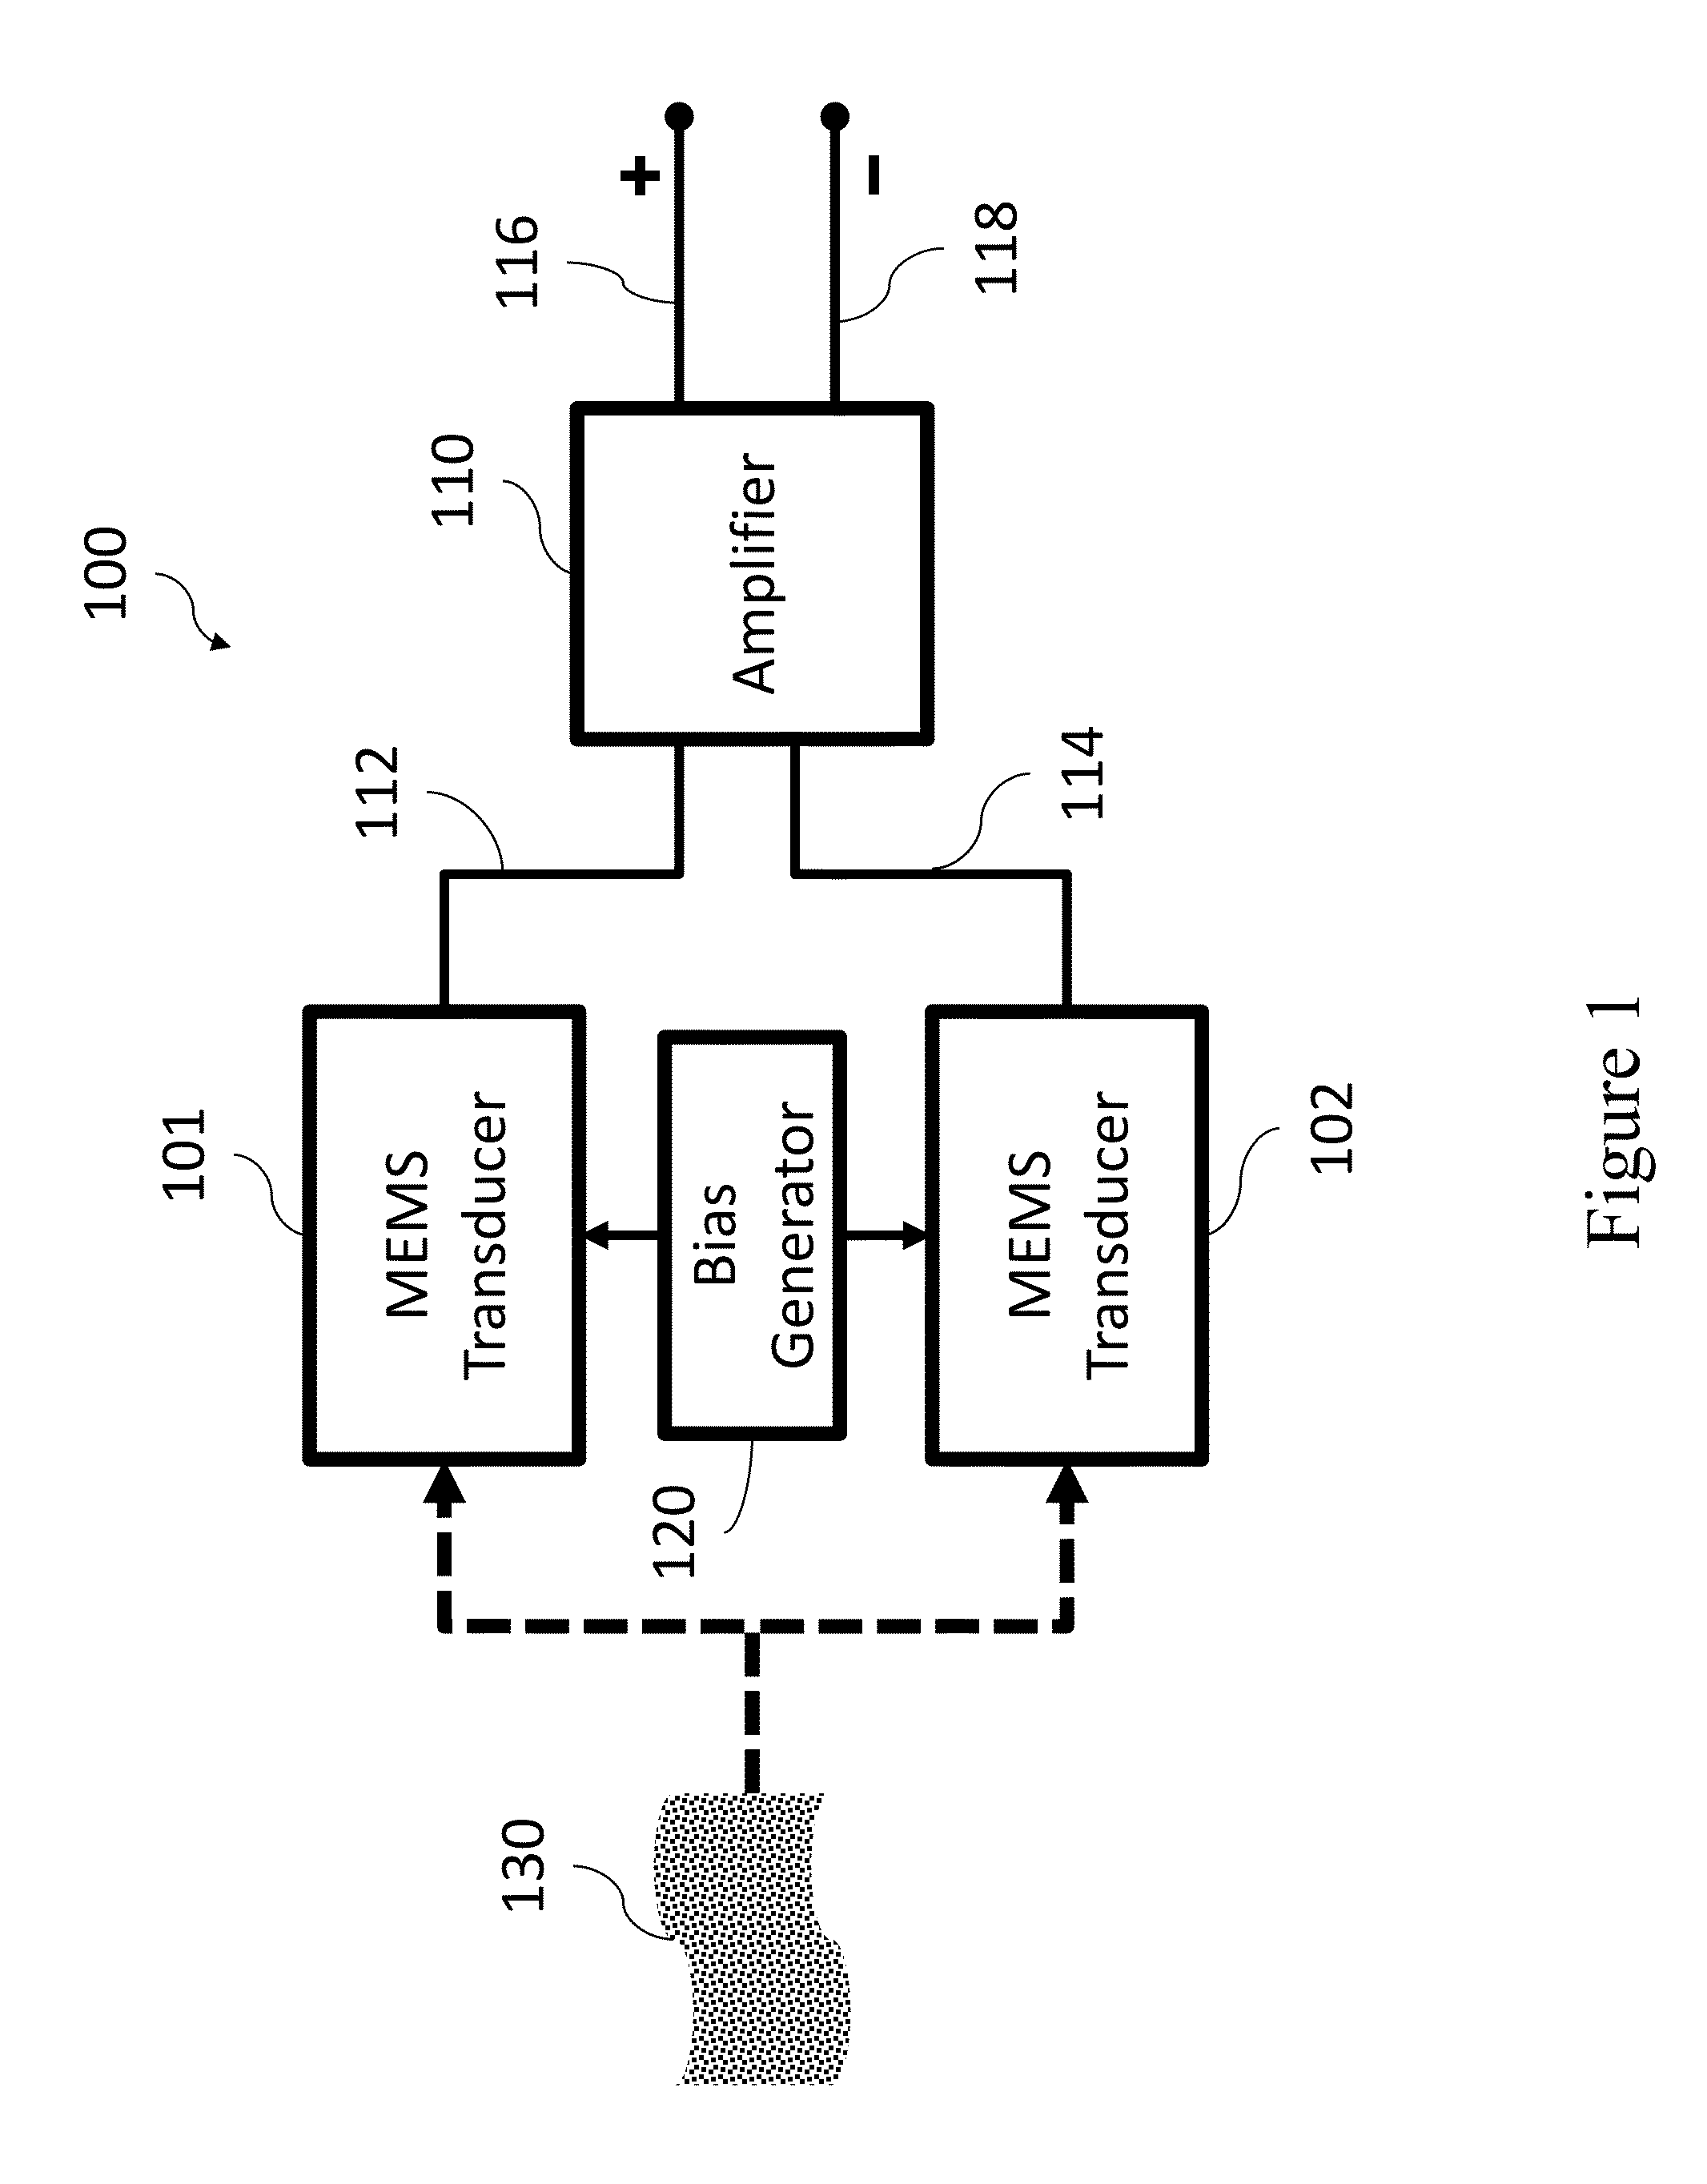 System and Method for a MEMS Transducer